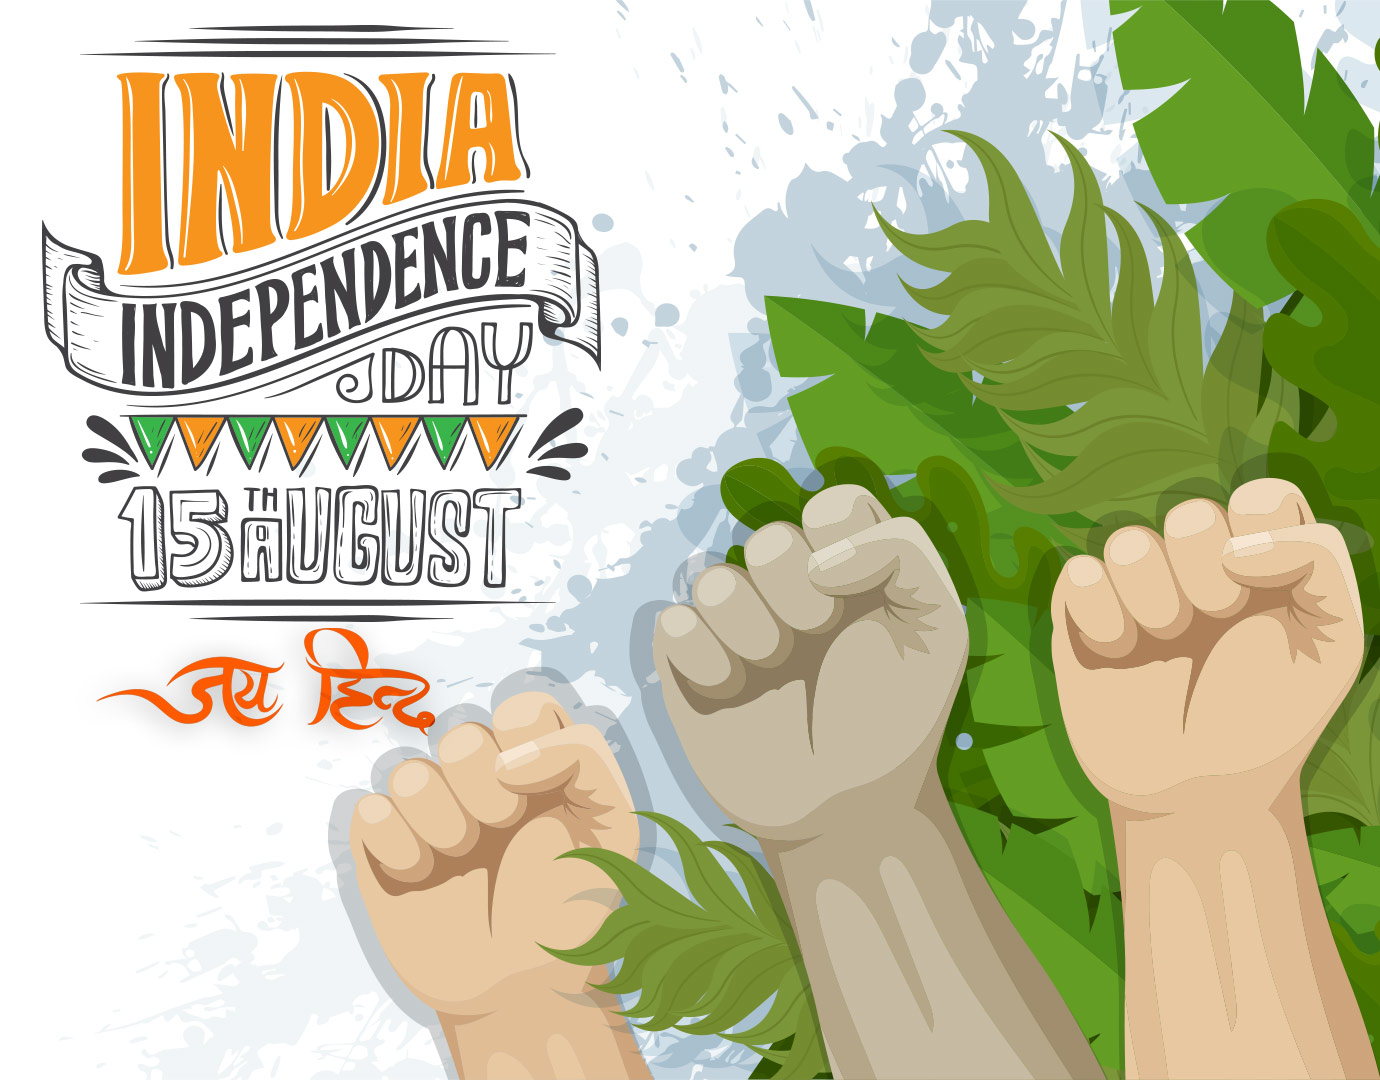 India independence day - 15th August wishes, greetings, quotes, post, status and cards